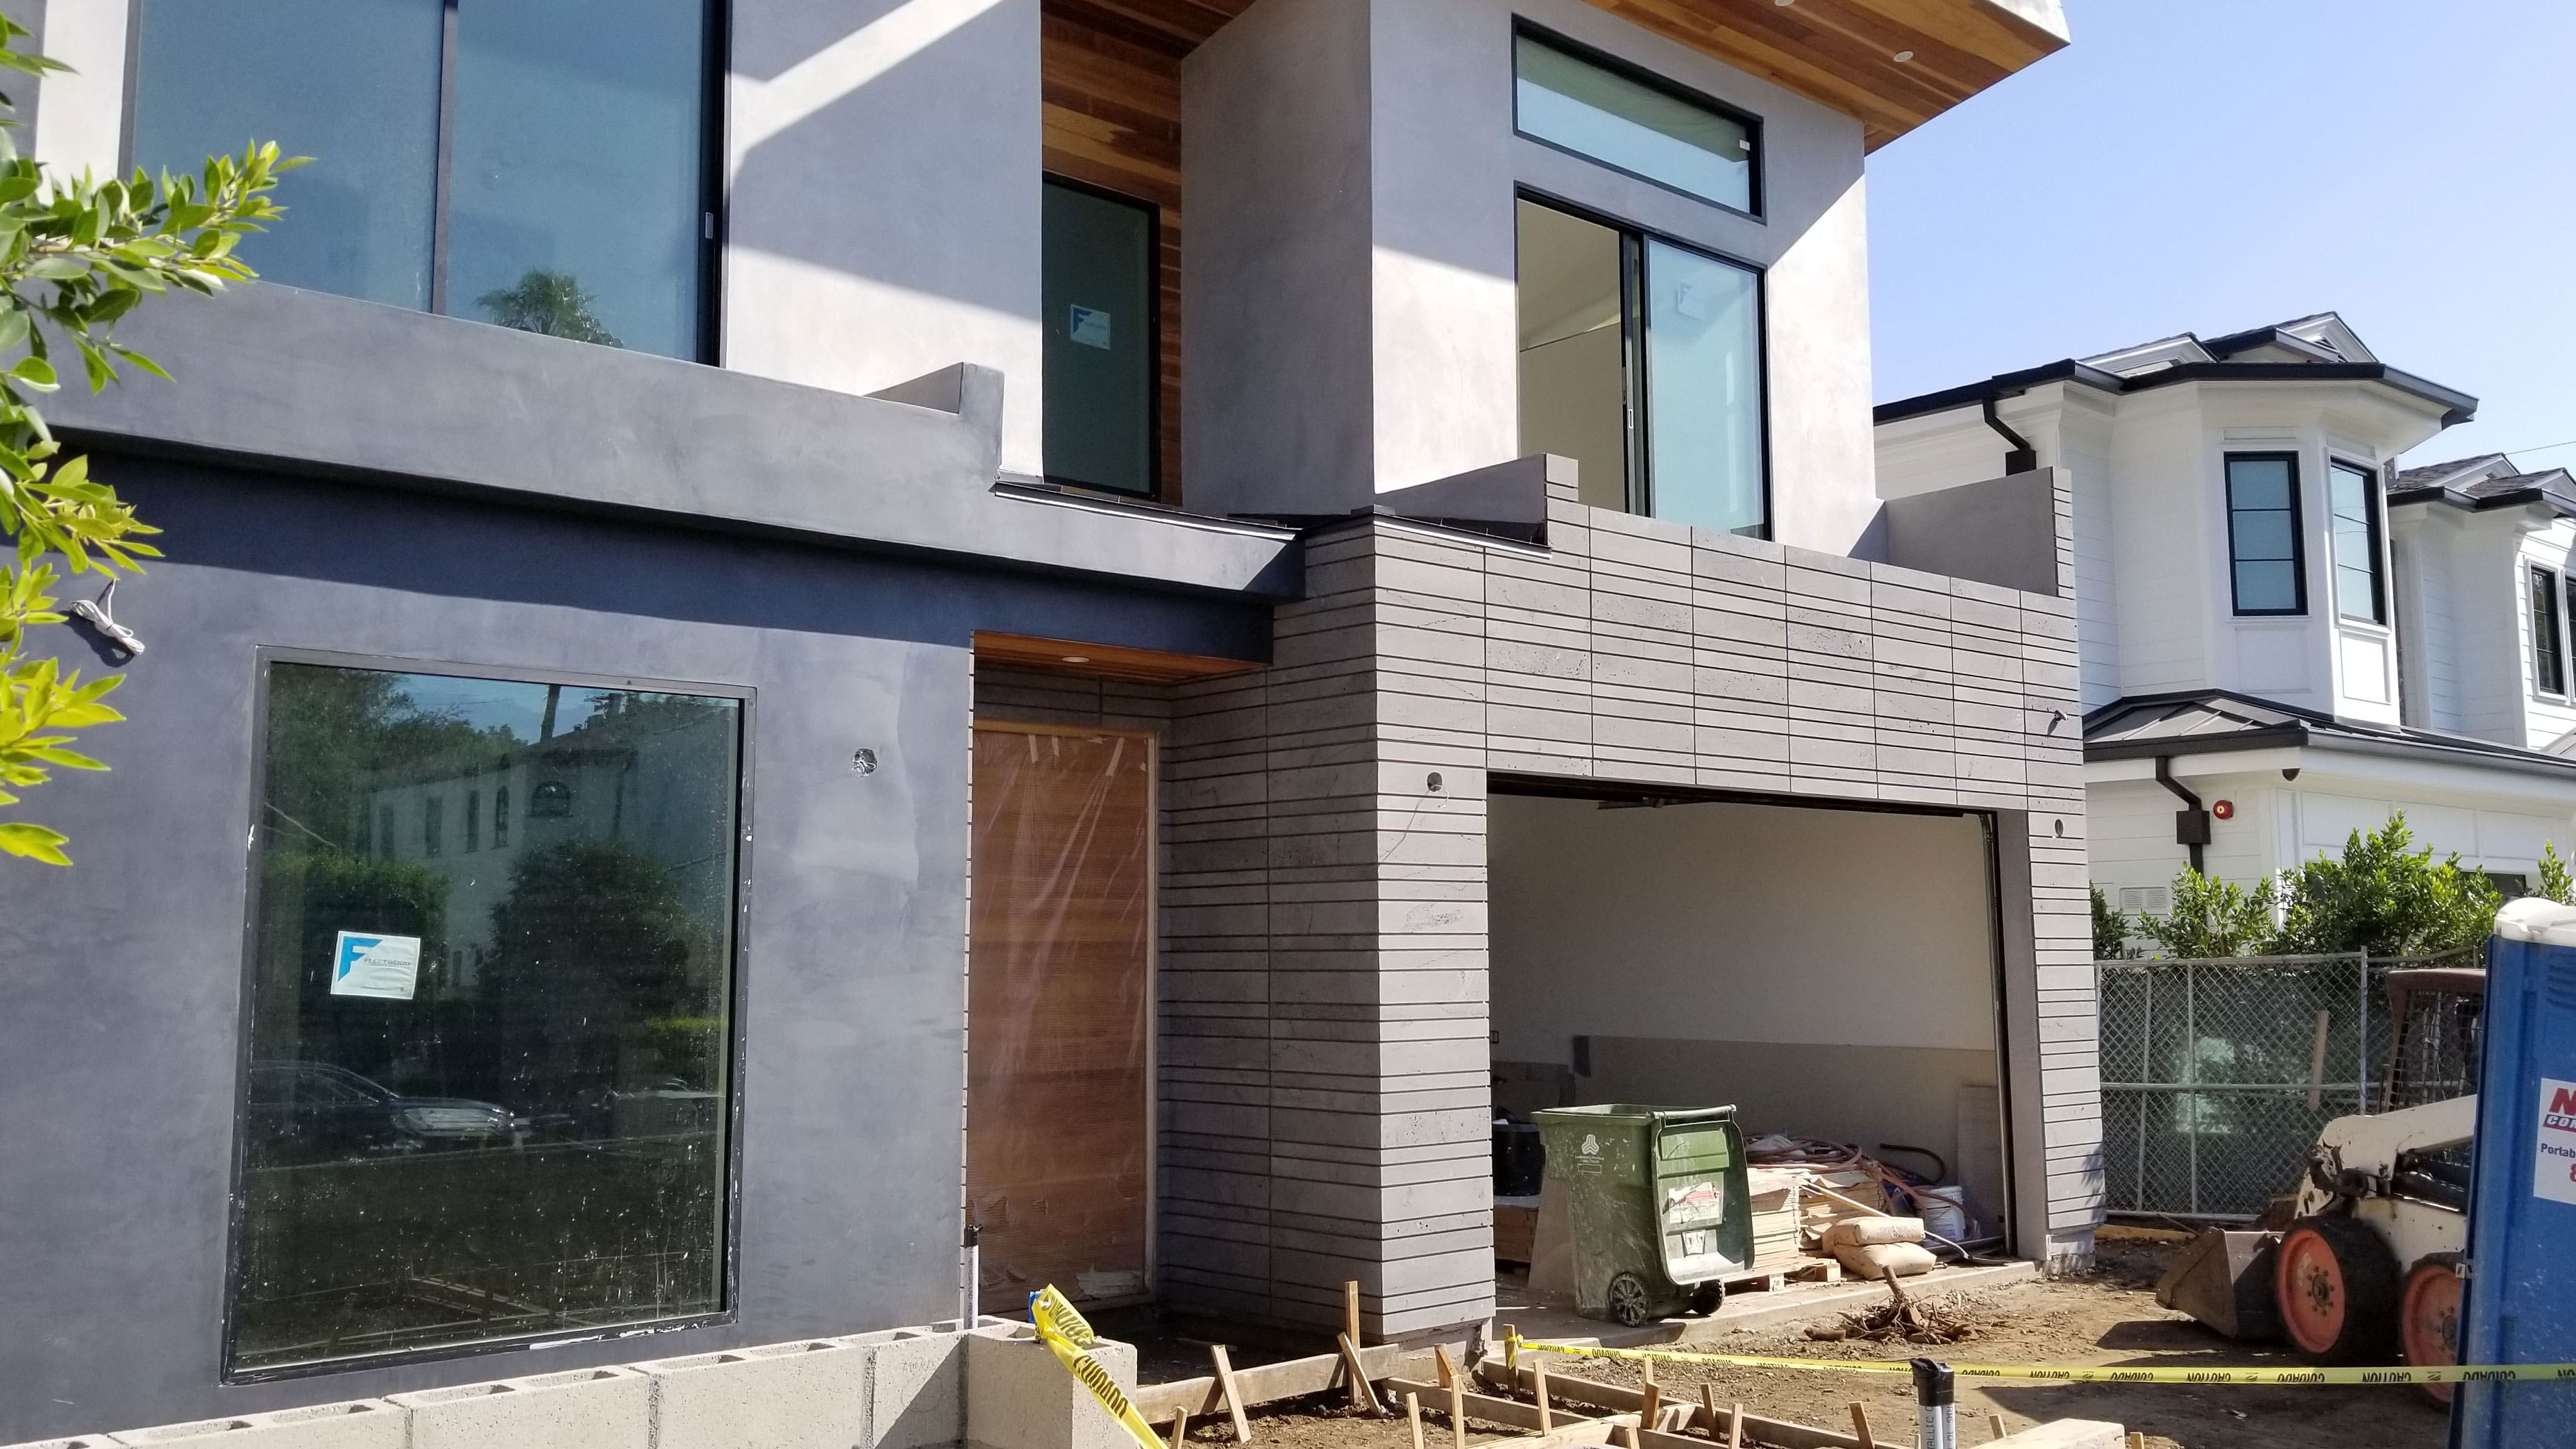 Norstone Platinum Planc Large Format Tile used as an accent on the front facade of a modern home under construction in Hollywood, CA